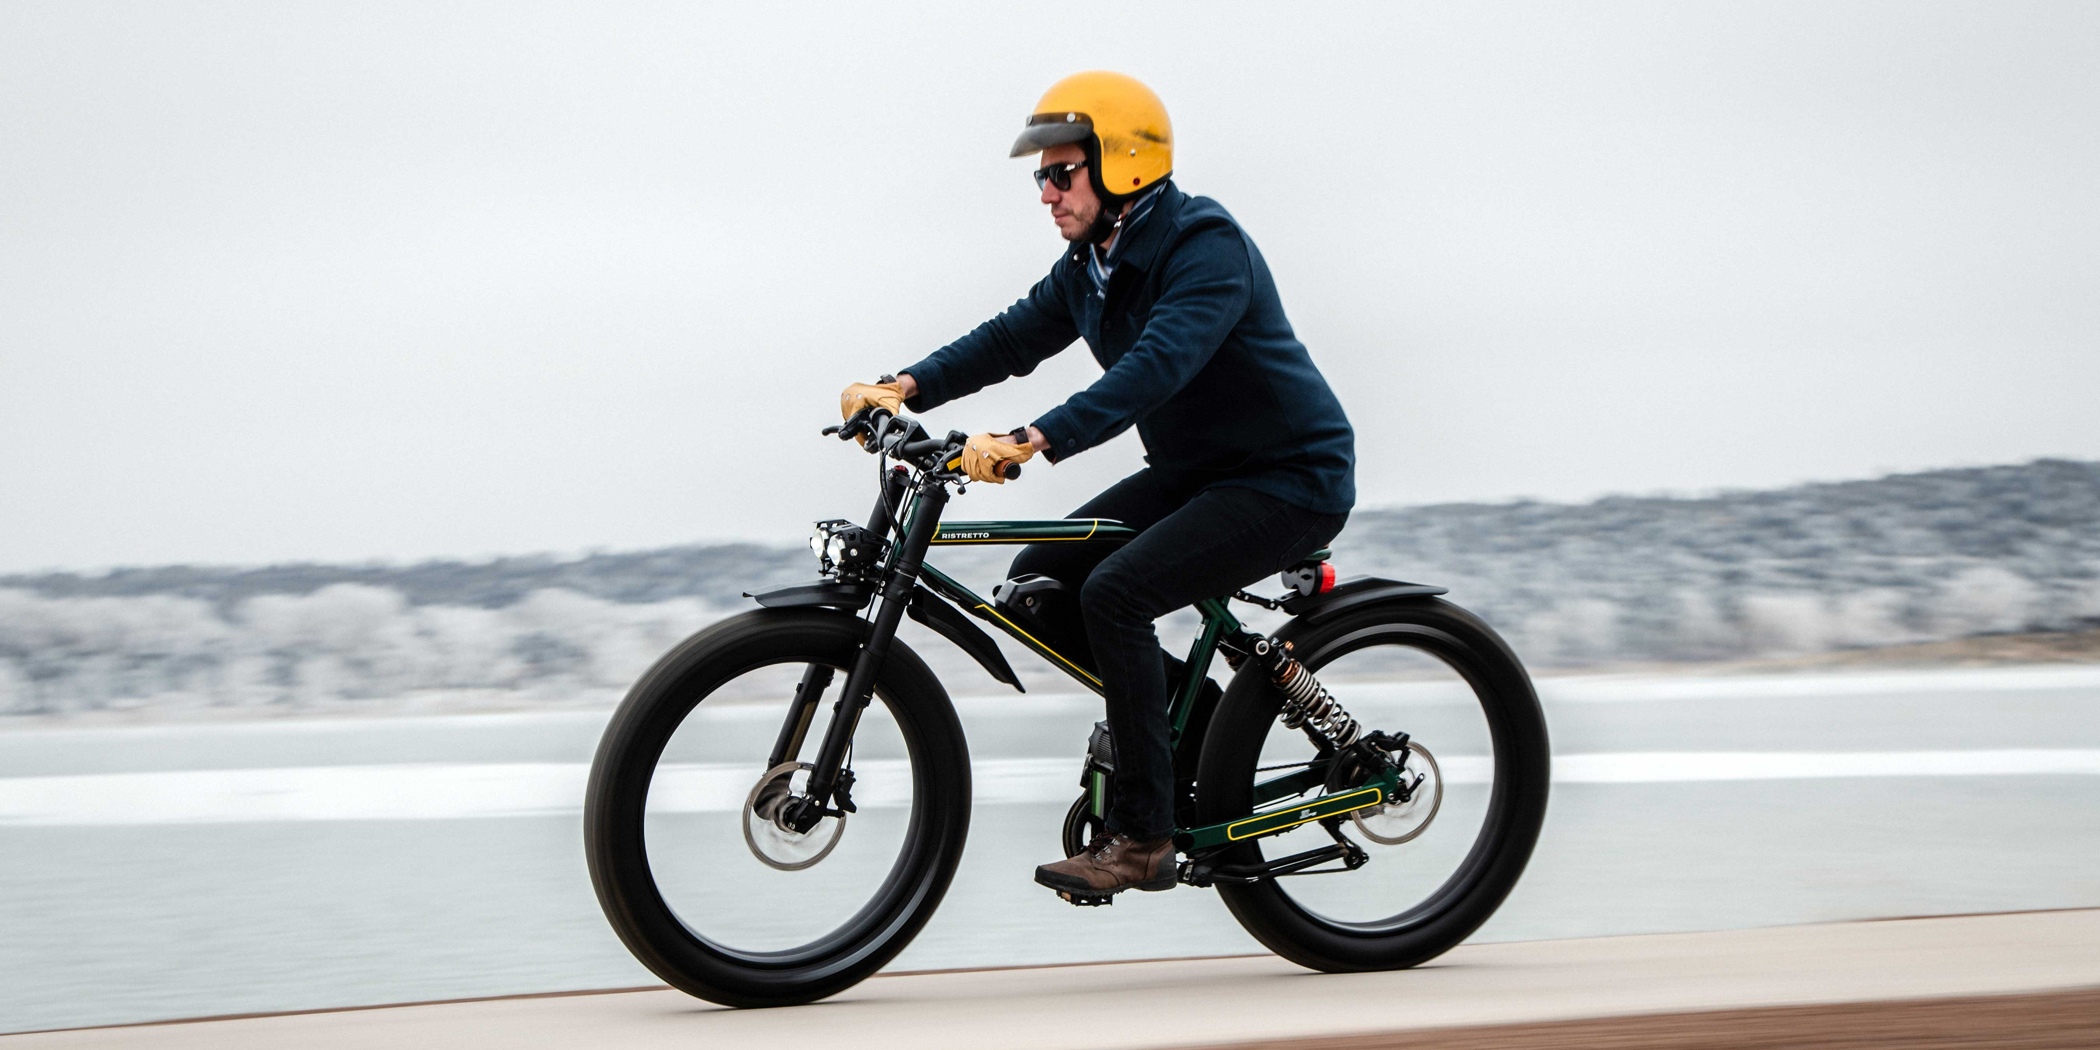 This new 40 MPH electric bike puts a fresh spin on mid-drive mopeds